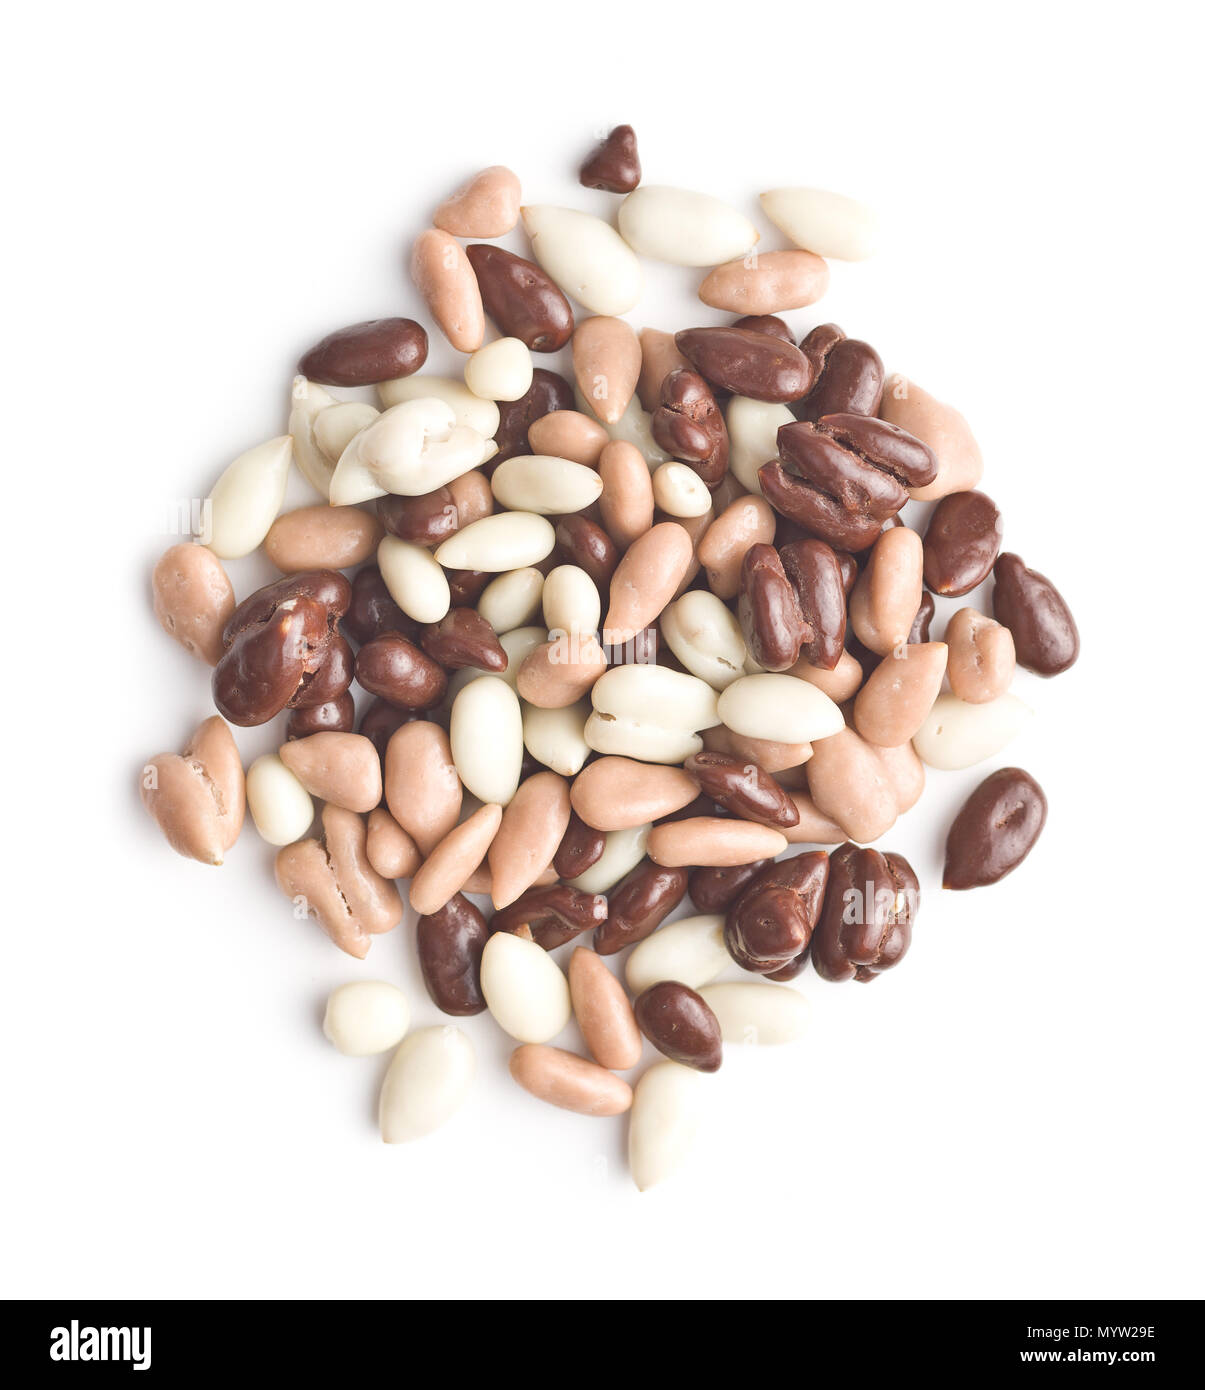 Chocolate covered sunflower seeds isolated on white background. Stock Photo